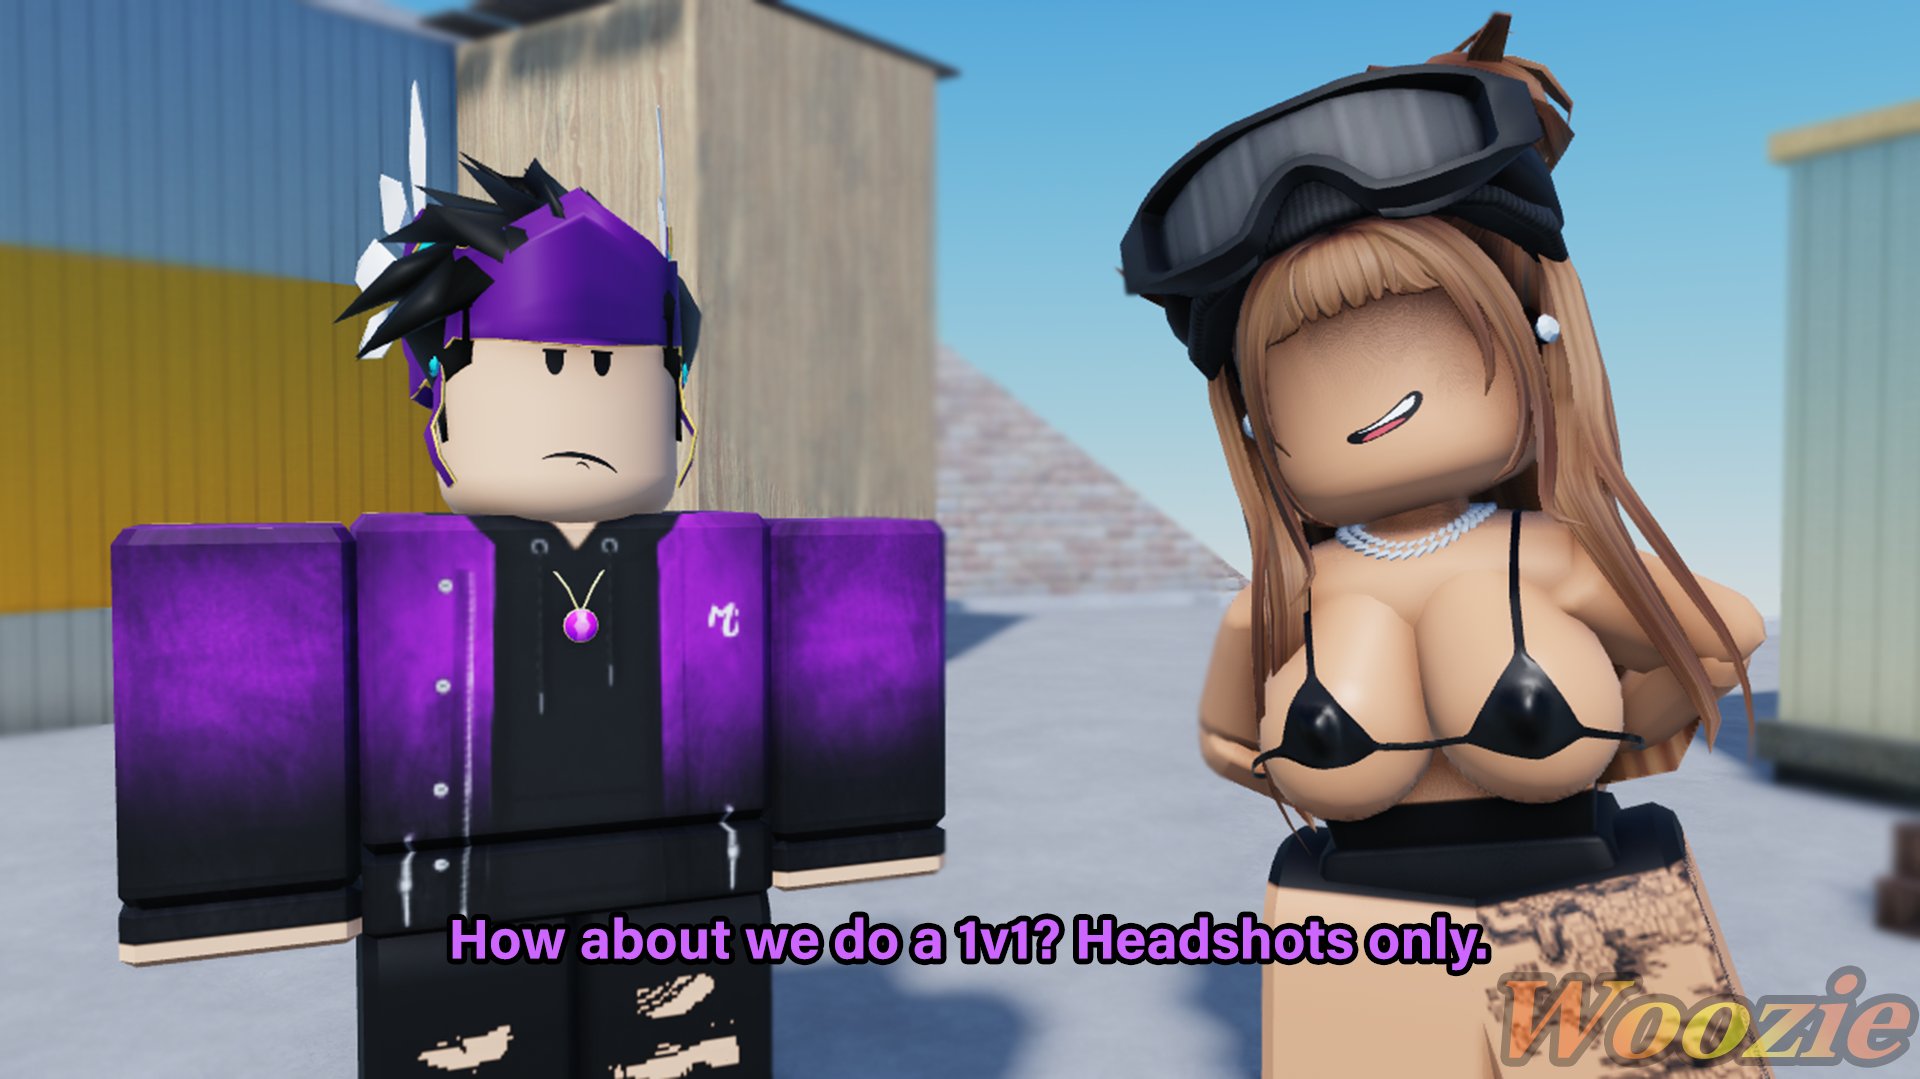 Roblox sex game link